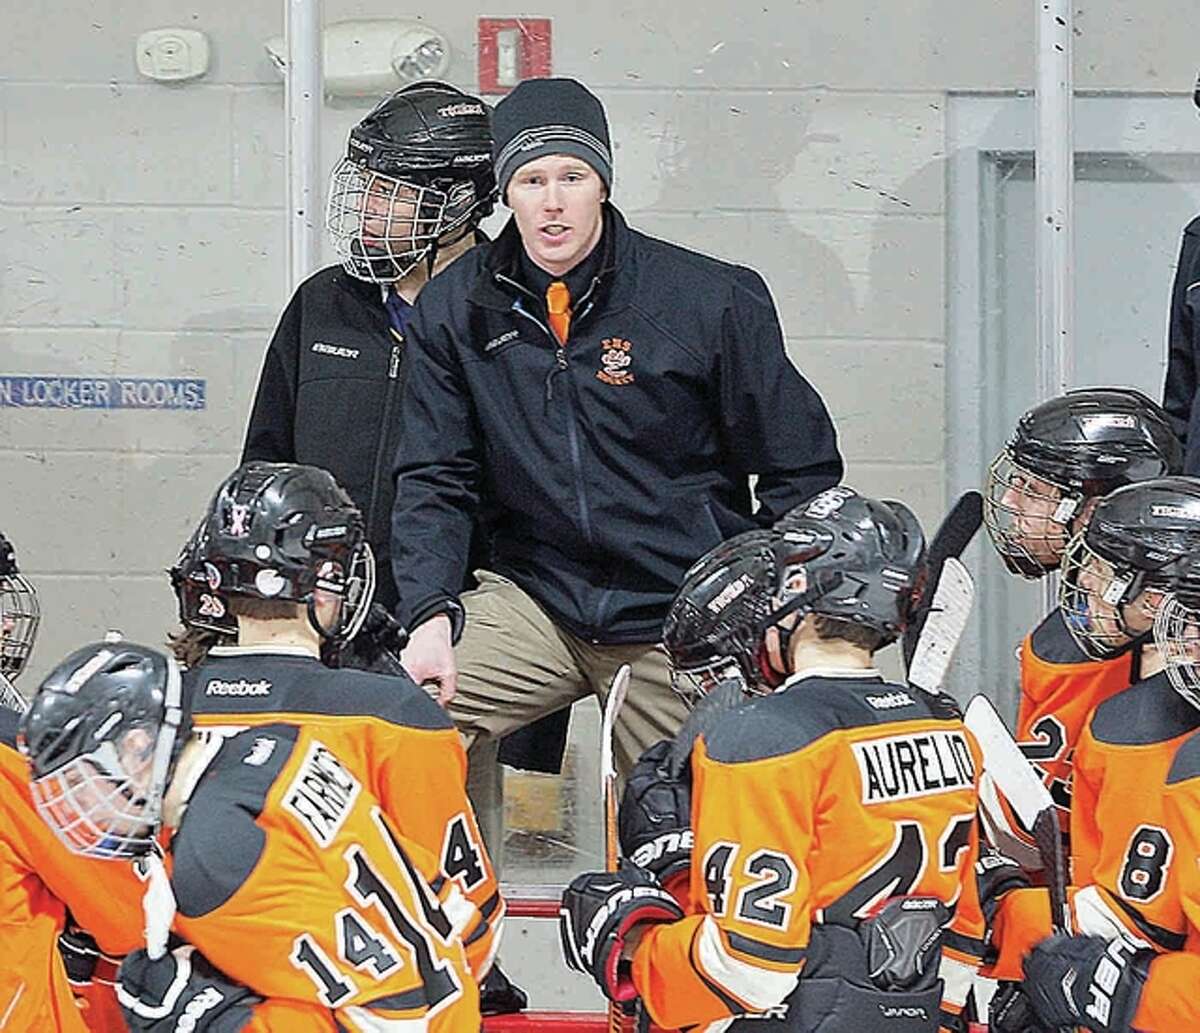 Edwardsville hockey coach Jason Walker’s team will play in the USA Hockey High School Nationals March 30-April 3 in Cleveland. The Tigers saw their first season in the Mid-States Hockey Association end in the league Challenge Cup semifinals with a two-game sweep at the hands of CBC.